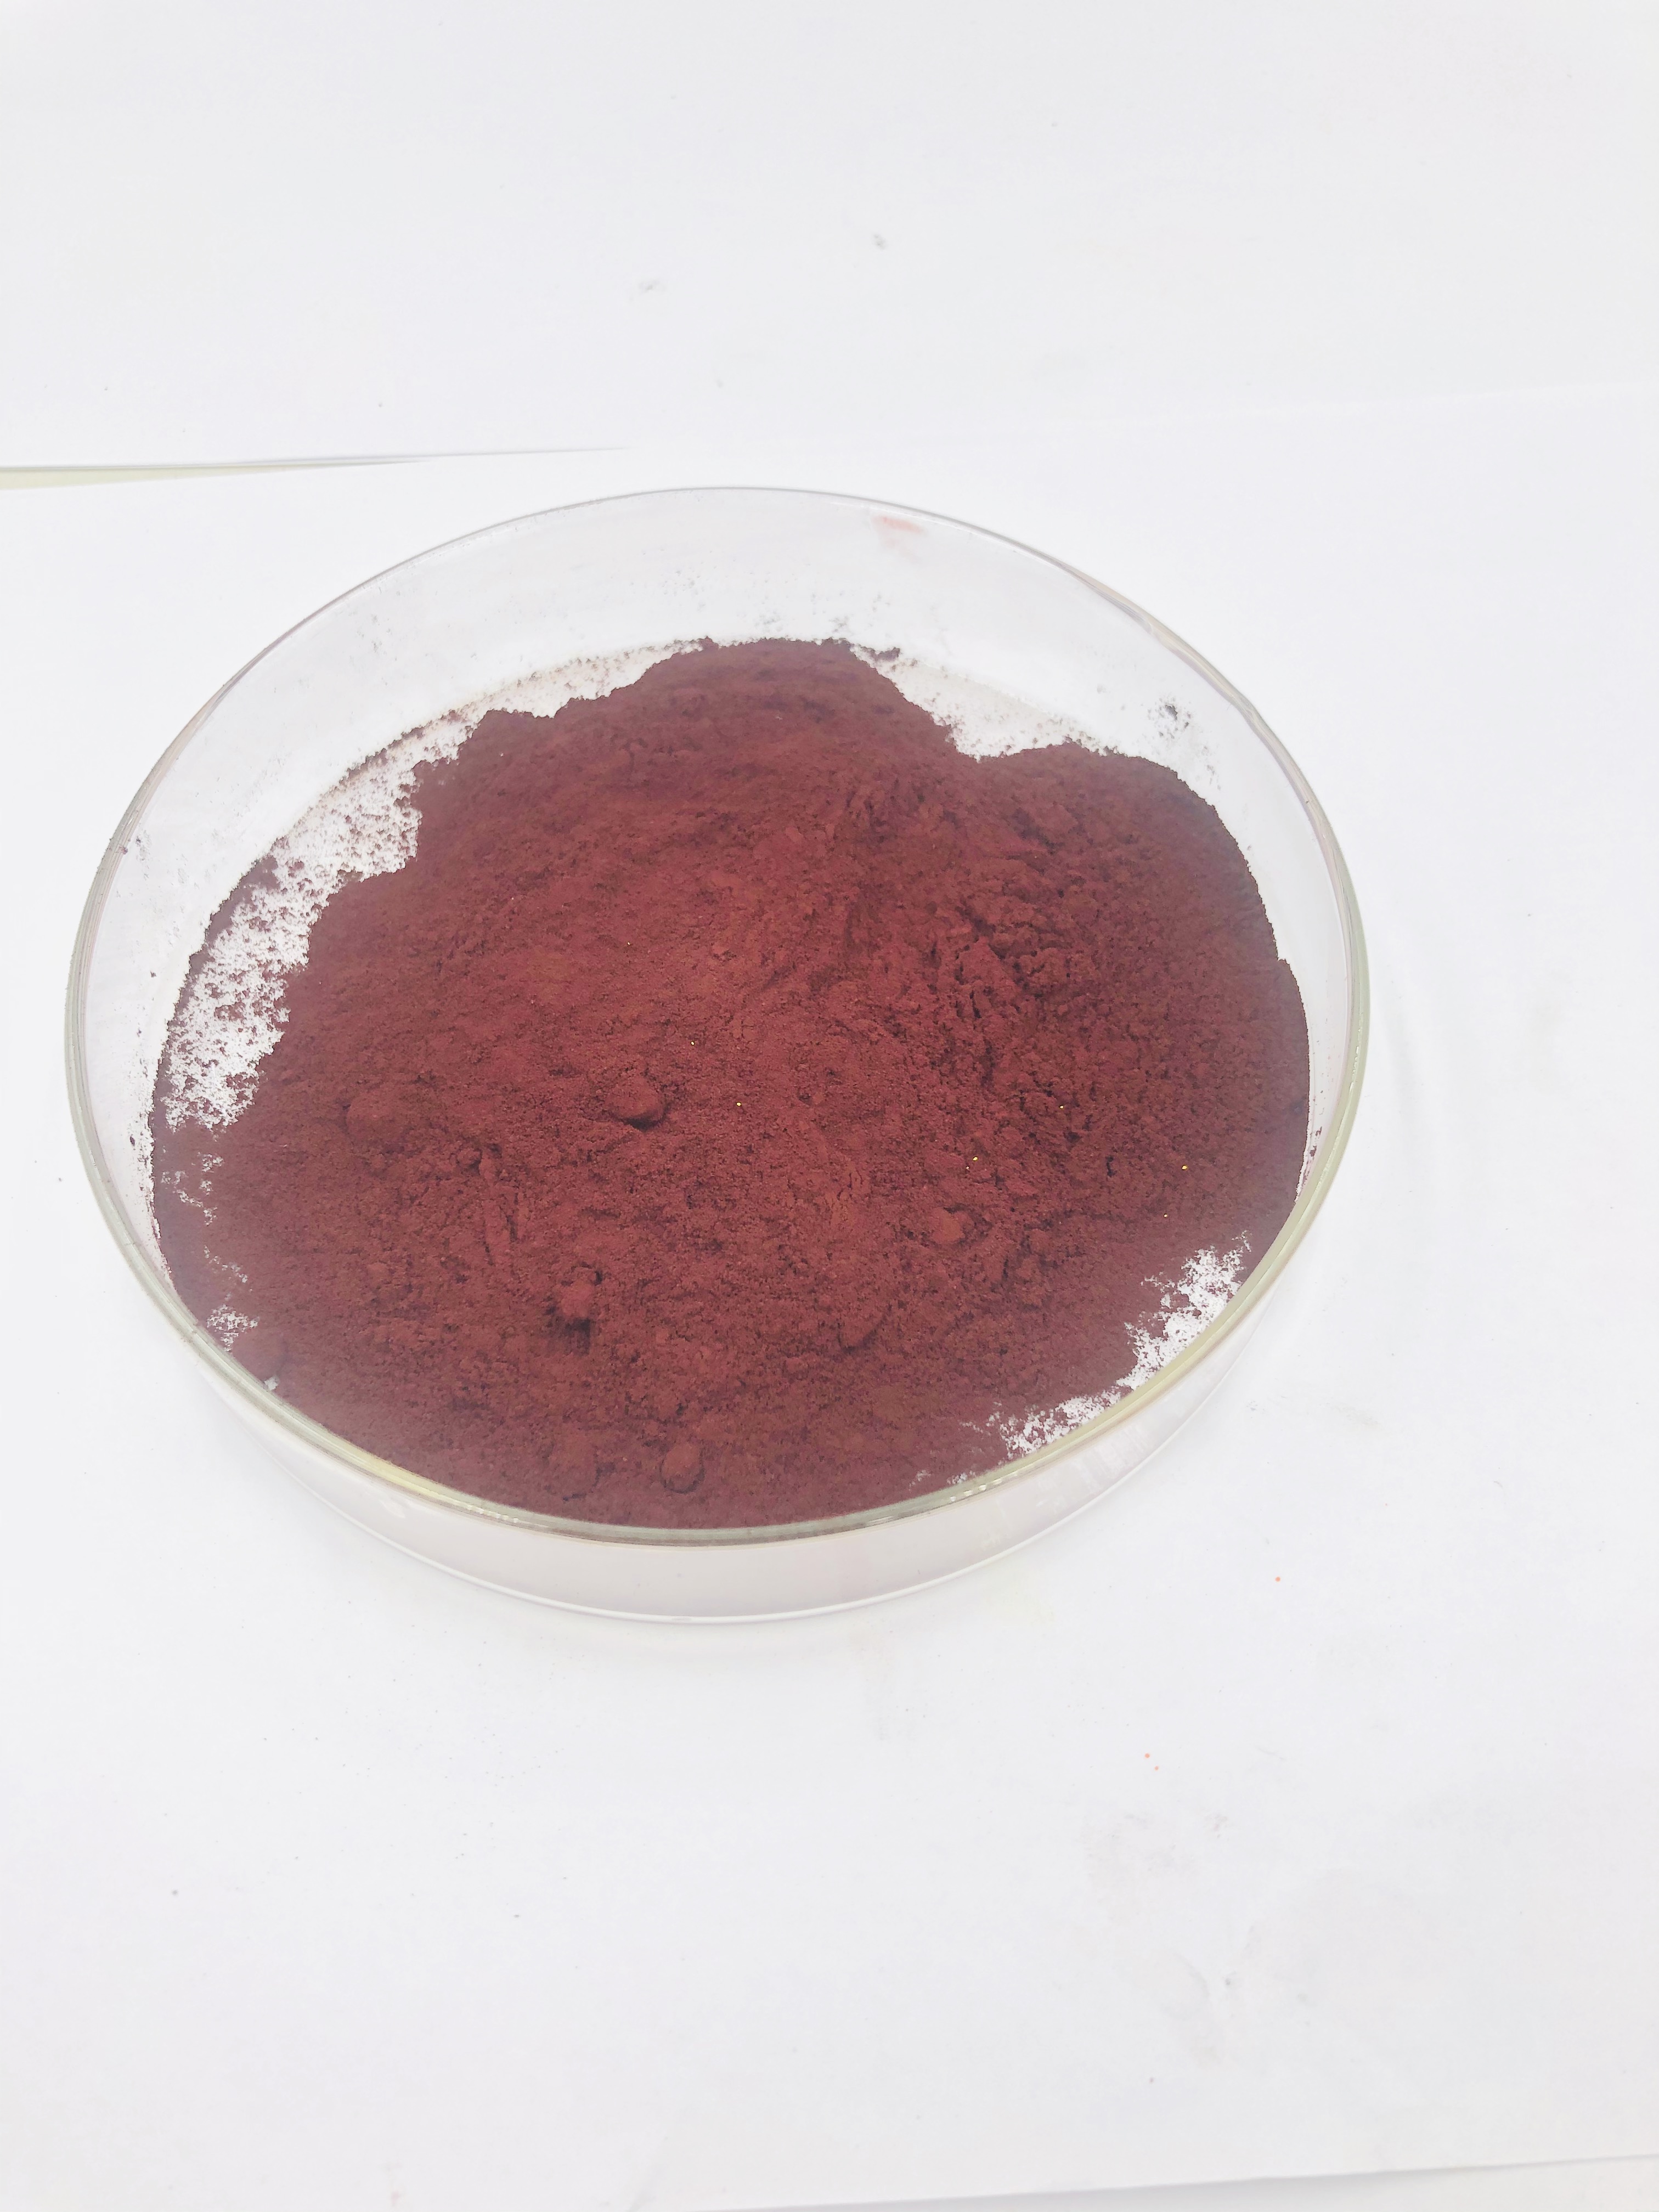 Basic Red 1 Good Coloring Strength for Silk Leather And Paper High quality Good Price 